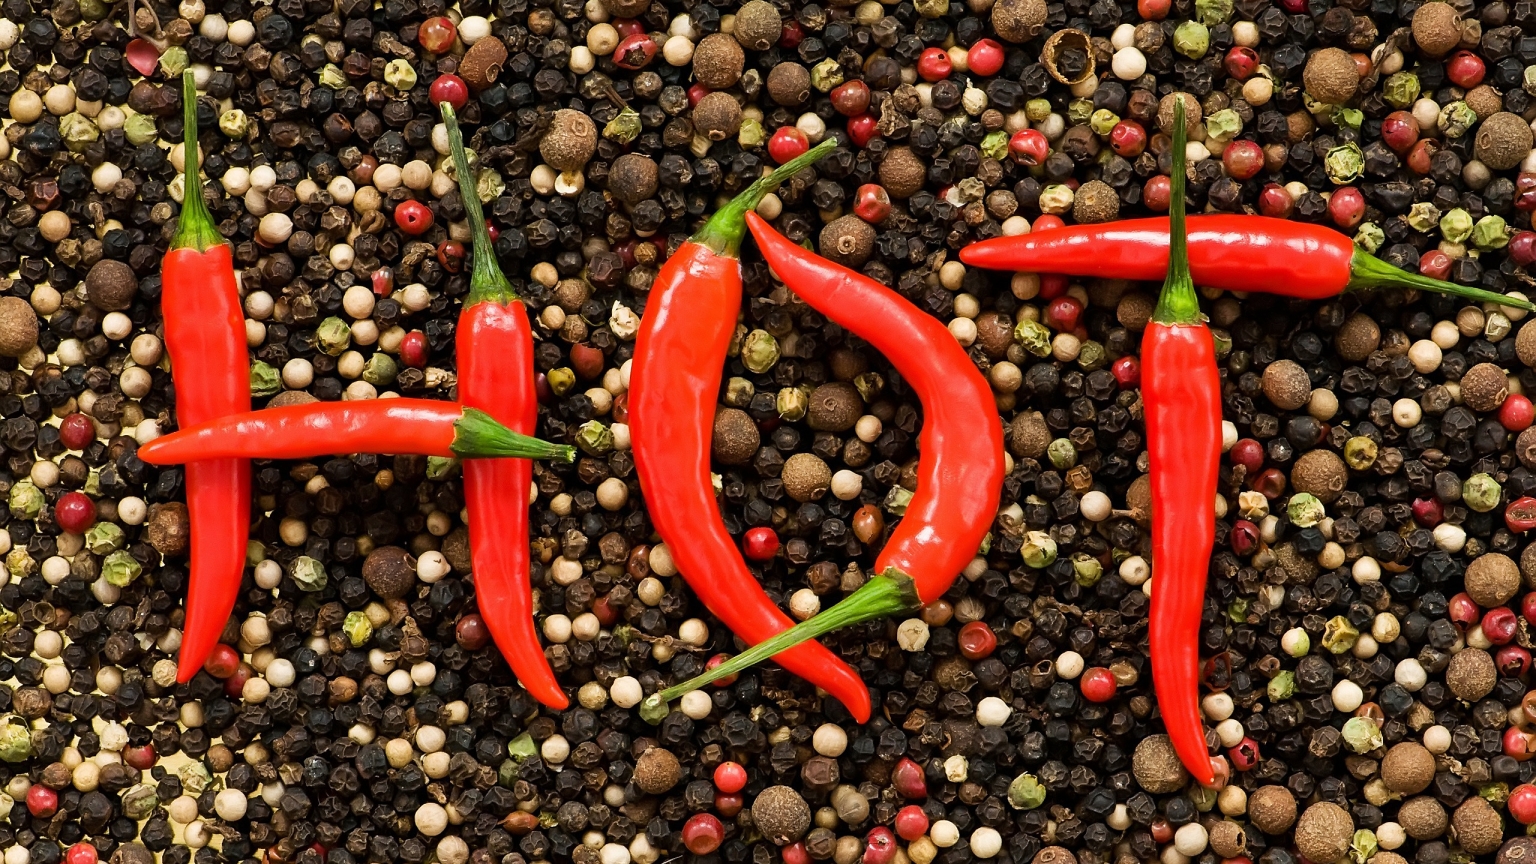 Hot Chilli and Pepper for 1536 x 864 HDTV resolution